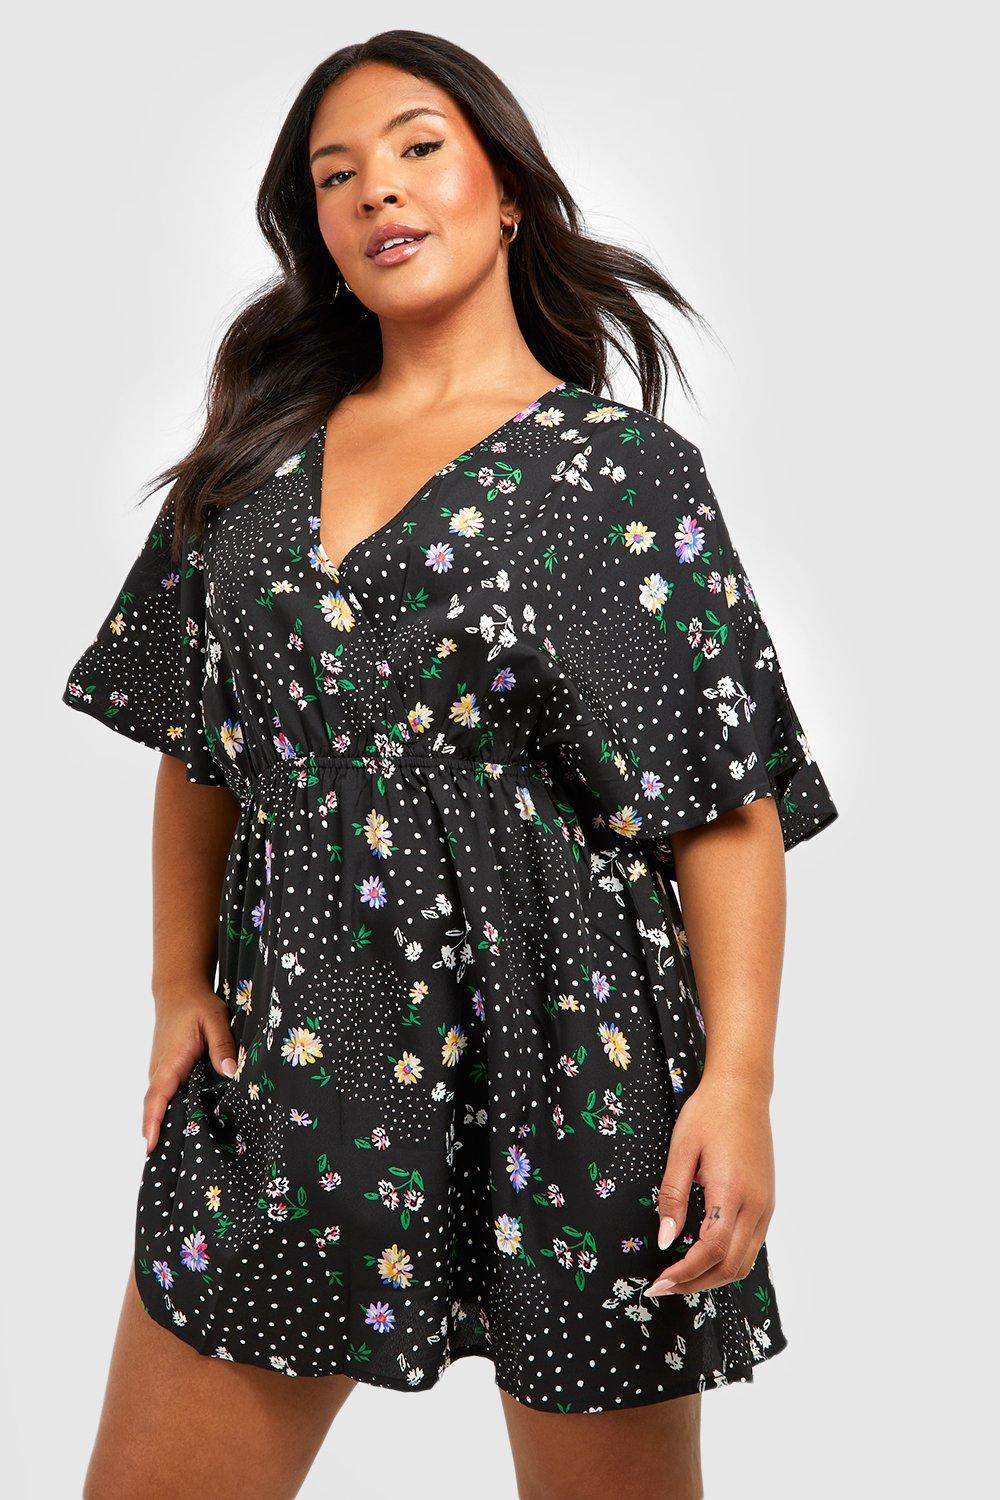 plus size black dresses for funeral